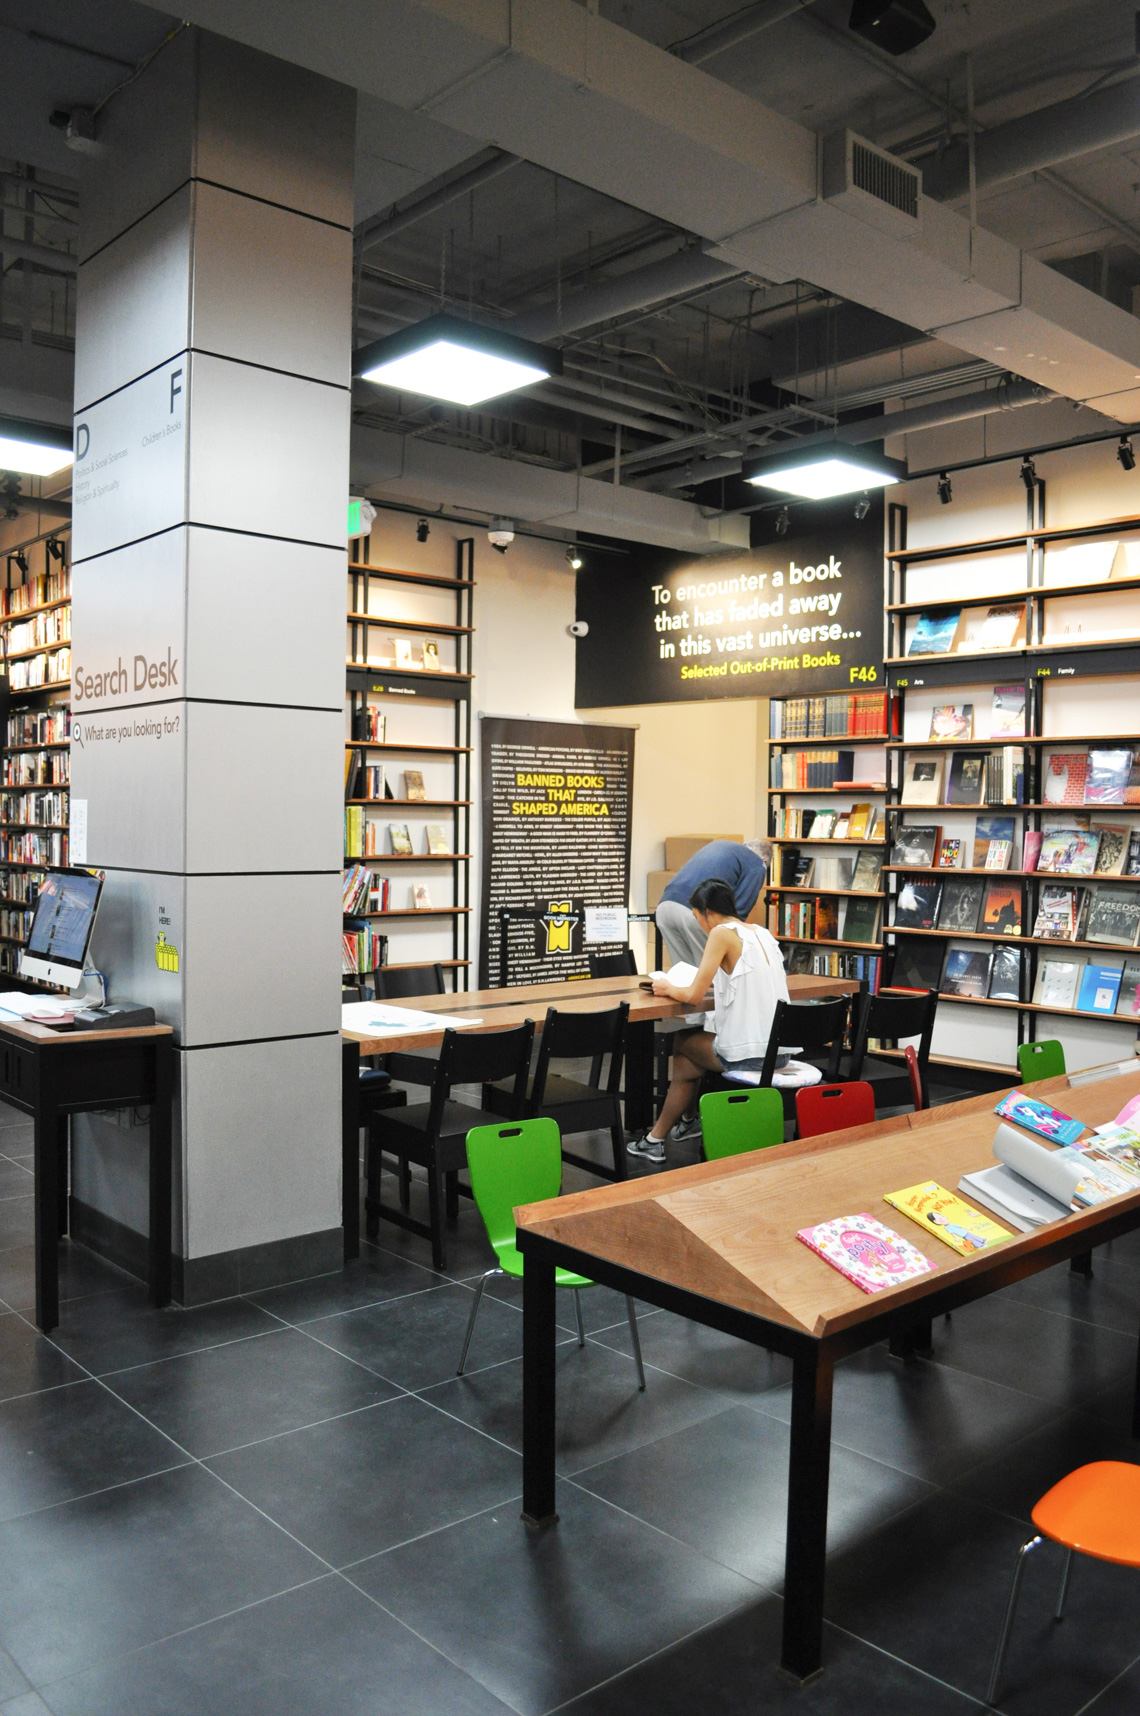 A building interior picture of book store. Book display wall, open ceiling with gray paint and dark gray tile floor finish. Wooden book display stands in the middle.